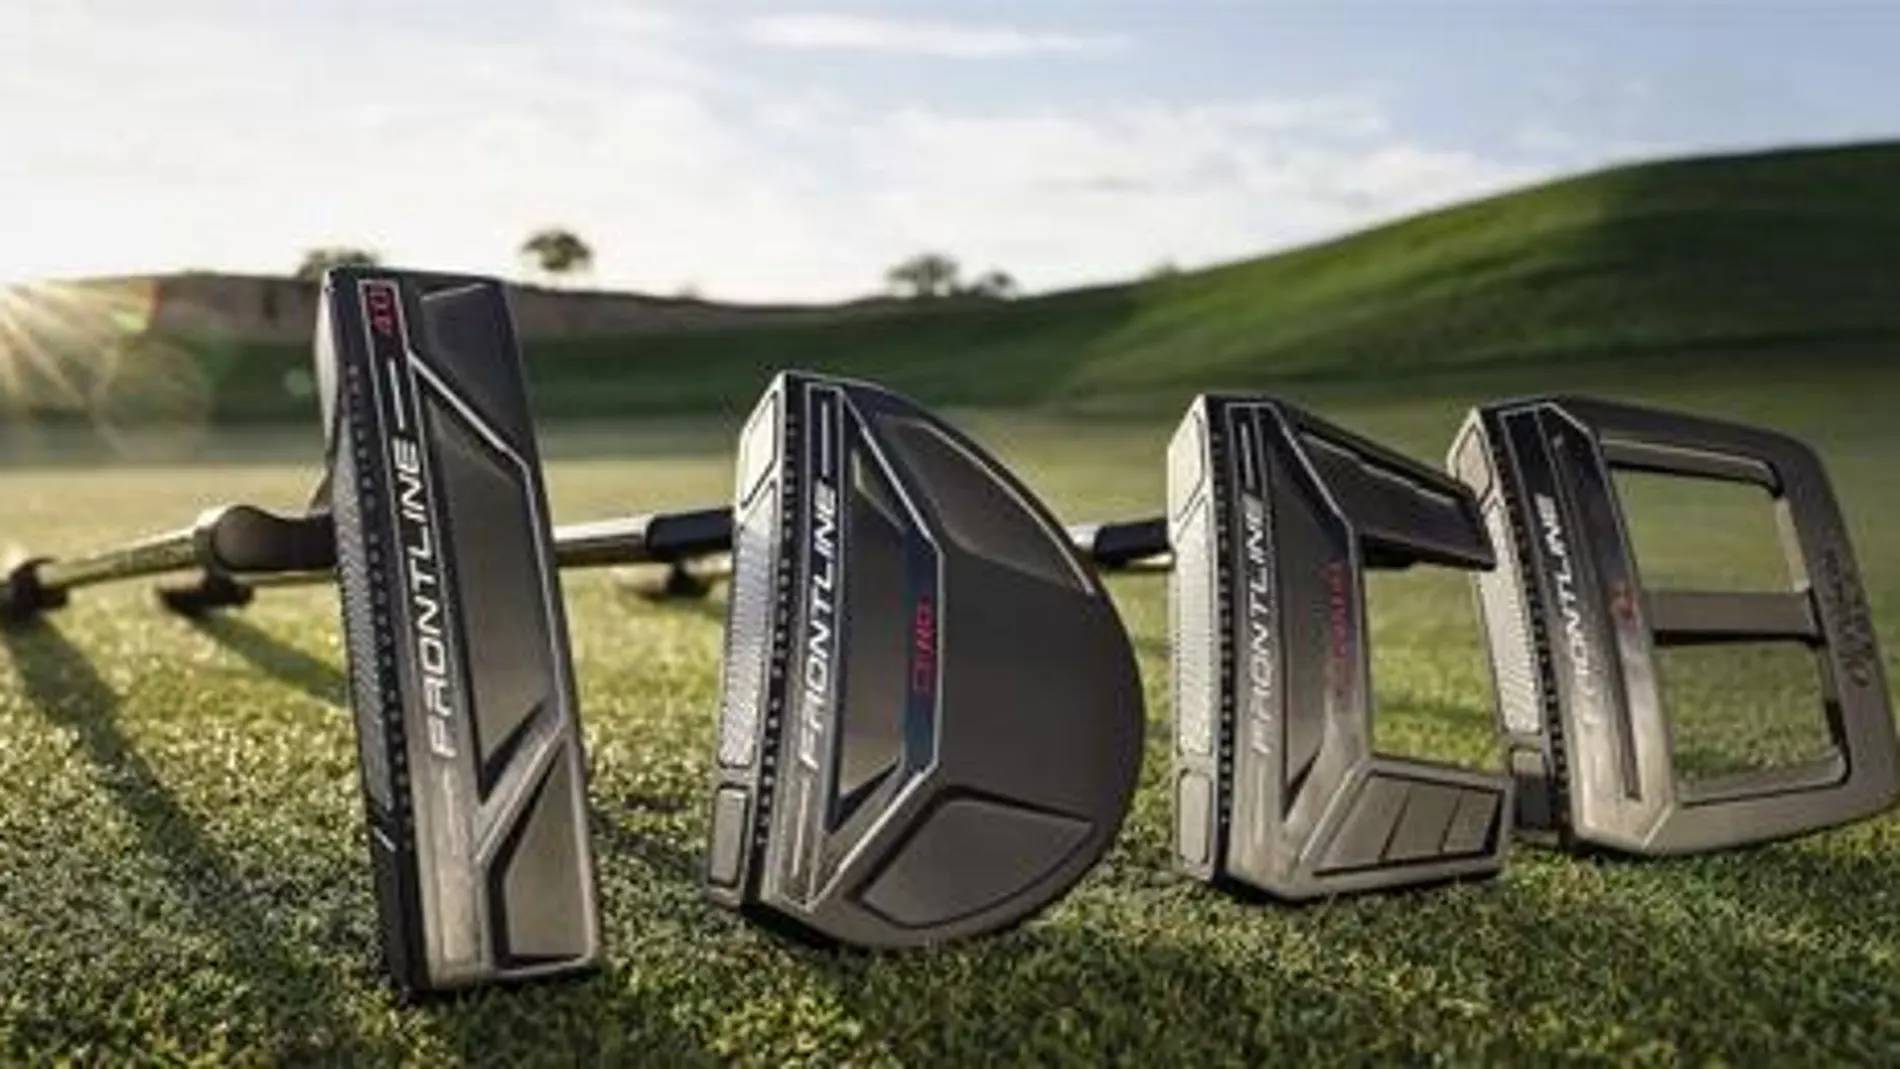 Nuevos putters Cleveland